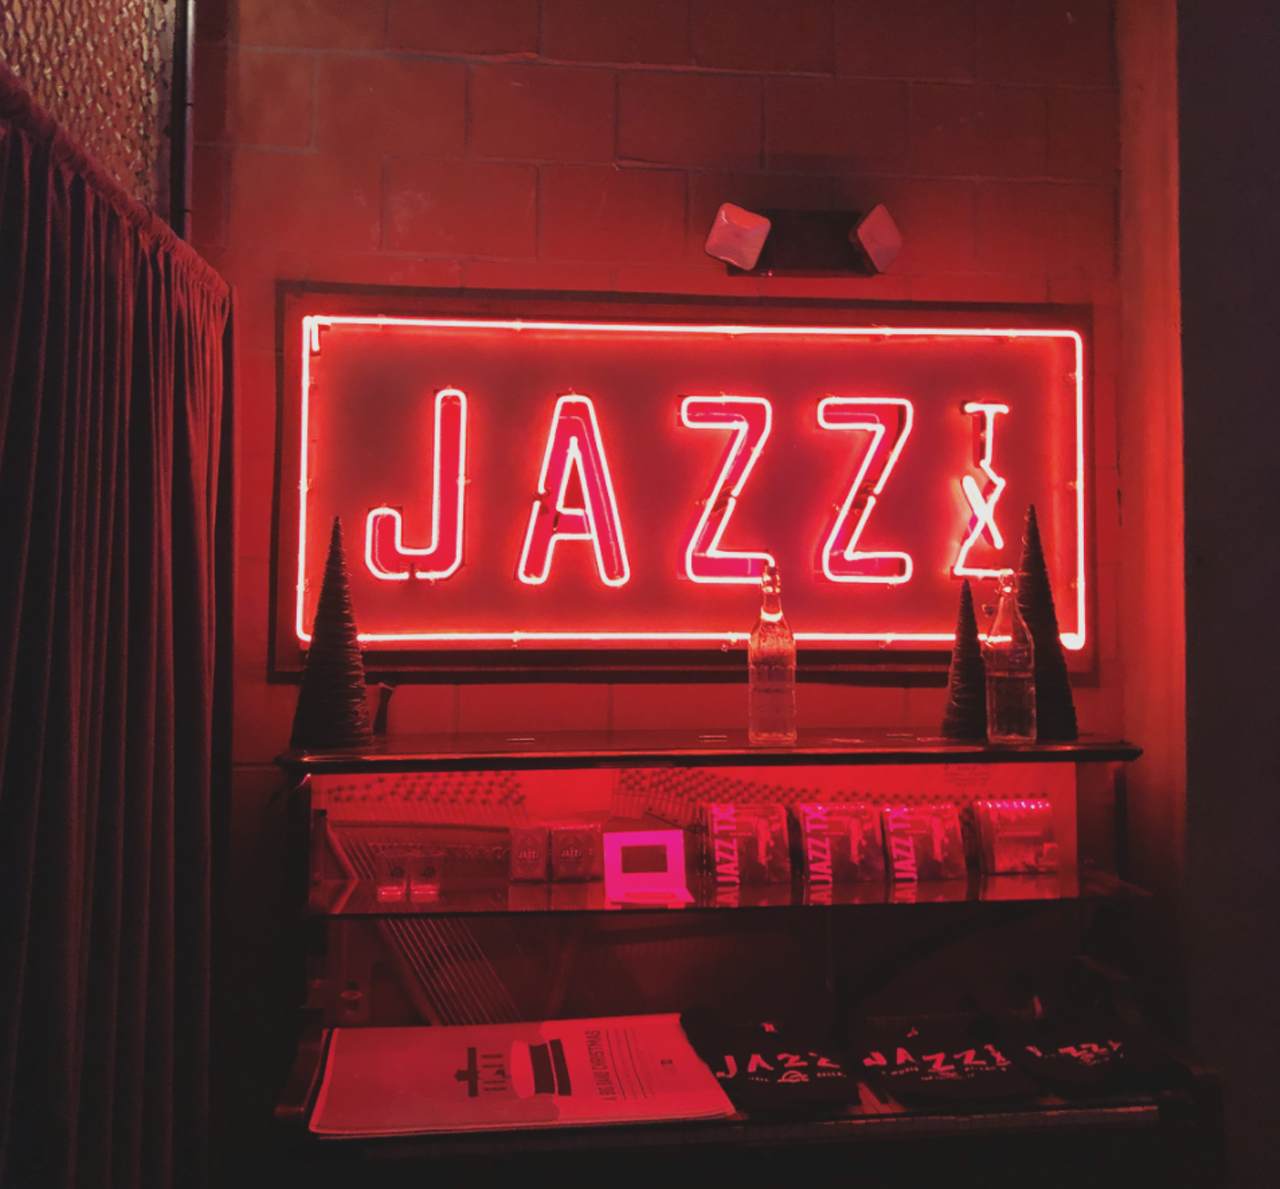 Jazz, TX
312 Pearl Pkwy., Building 6, (210) 332-9386, jazztx.com
Want cocktails and next-level jazz, salsa and country music? Find it at this downstairs bar owned by Brent “Doc” Watkins.
Photo via Instagram / leslie_brignac